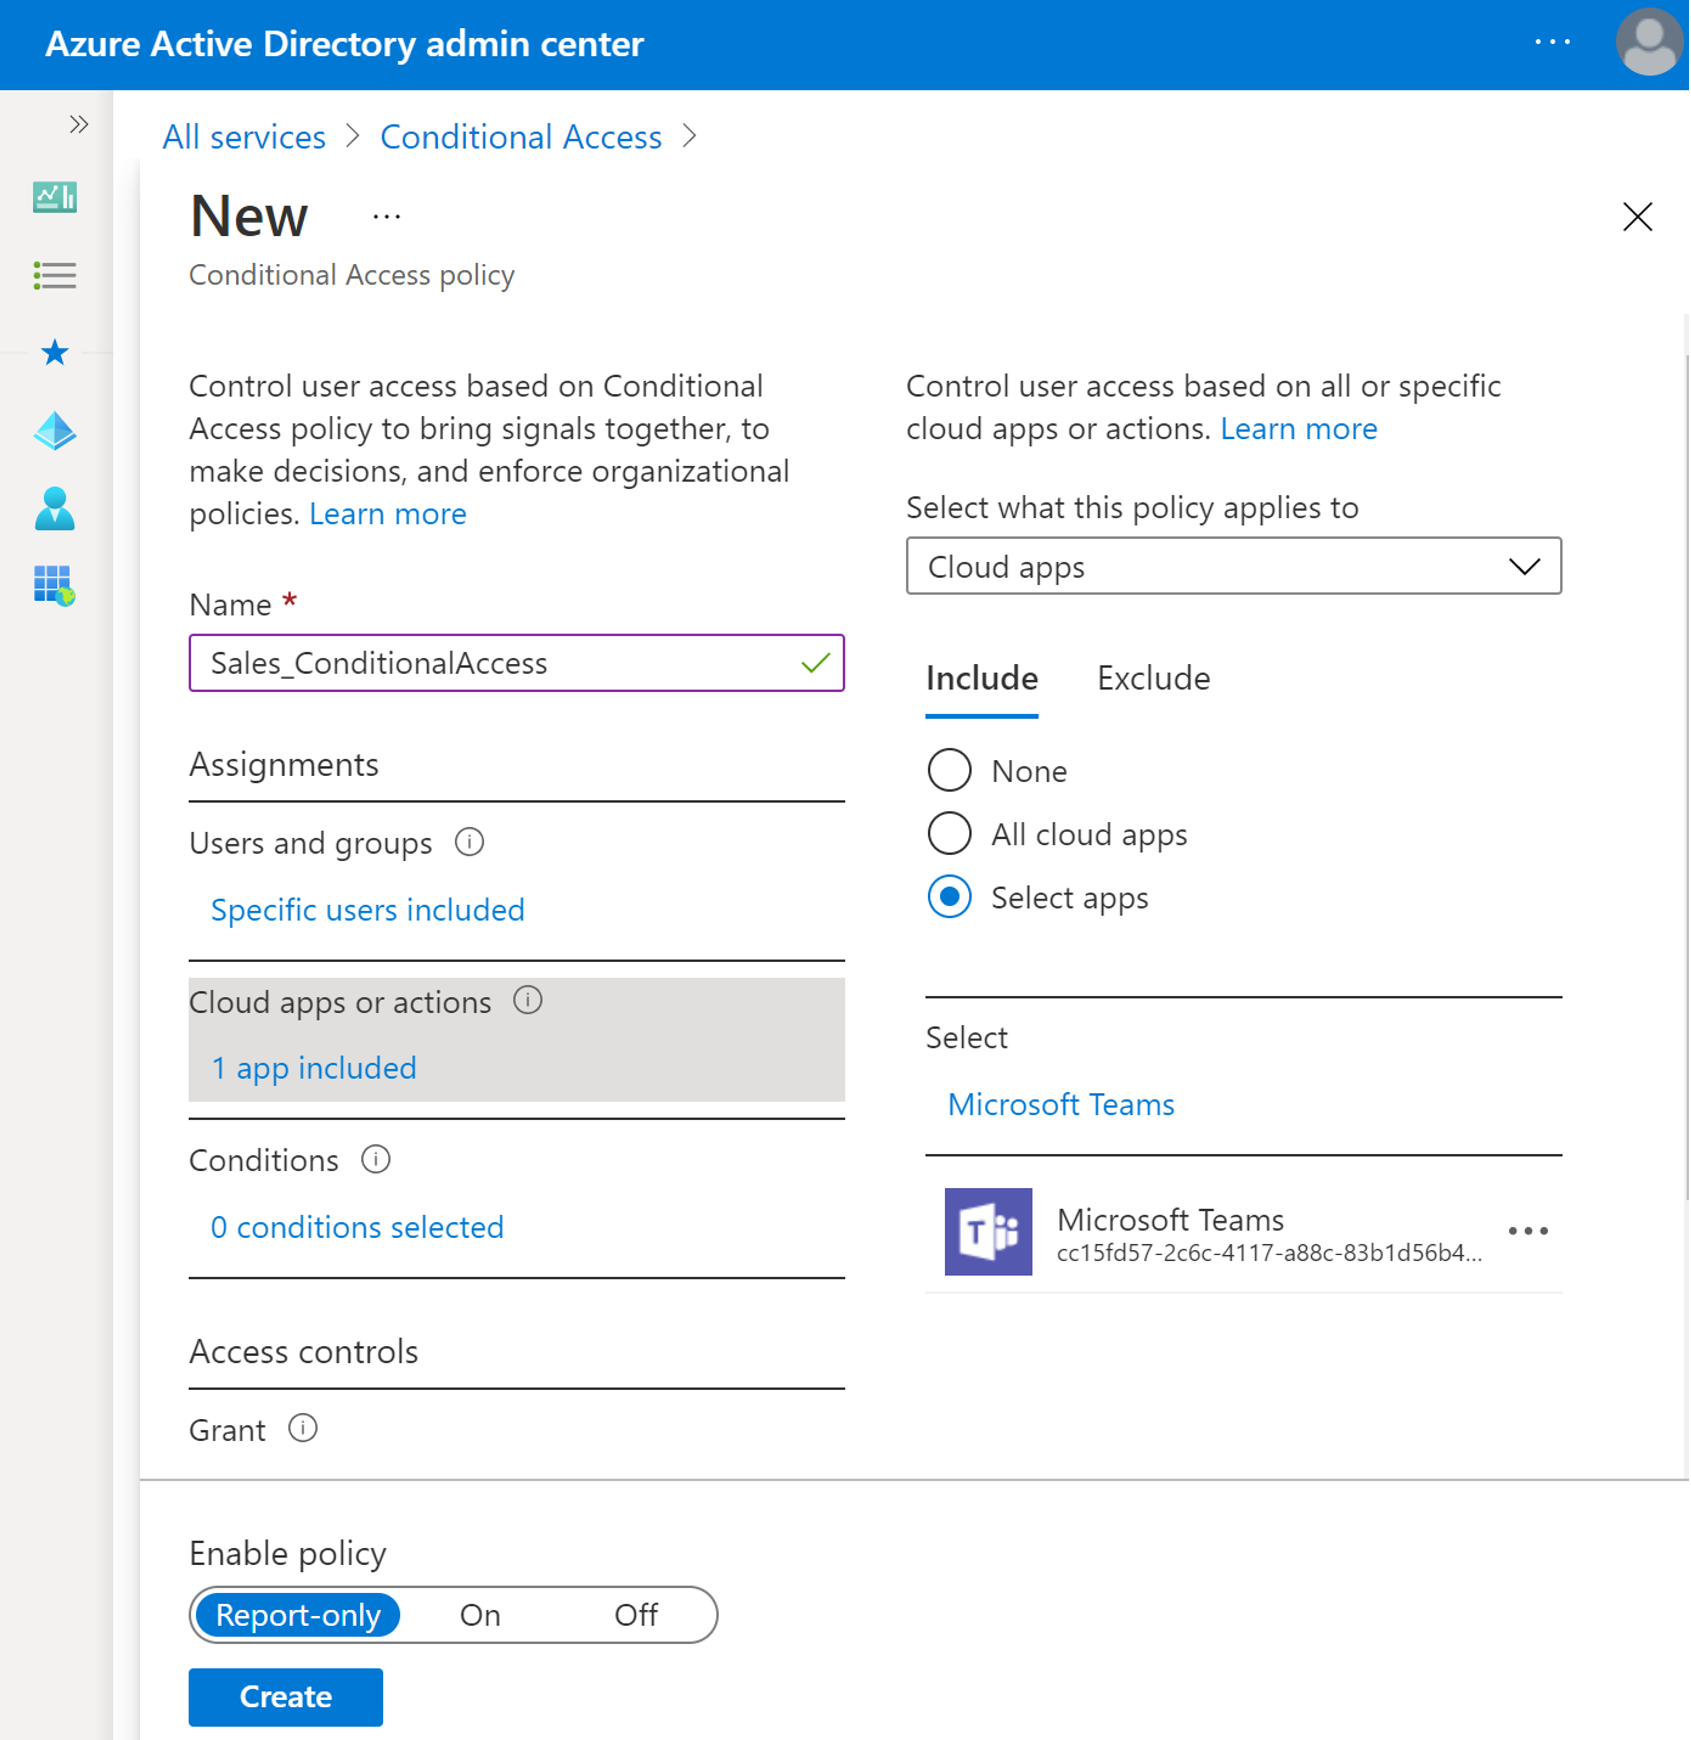 Screenshot of adding Teams to Conditional Access policy.